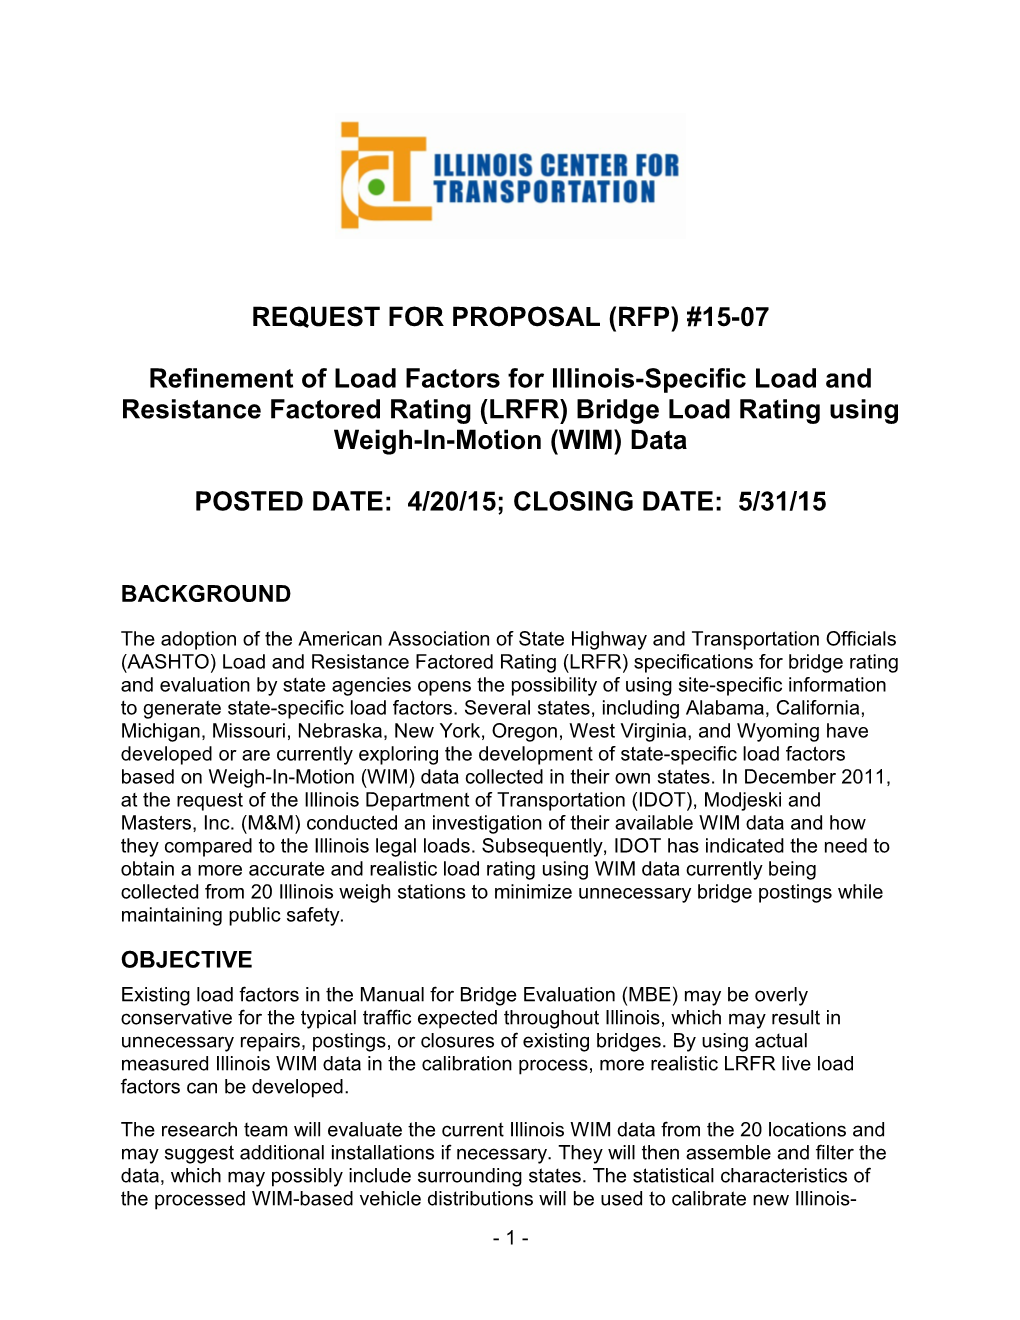 Request for Proposal (Rfp) #15-07